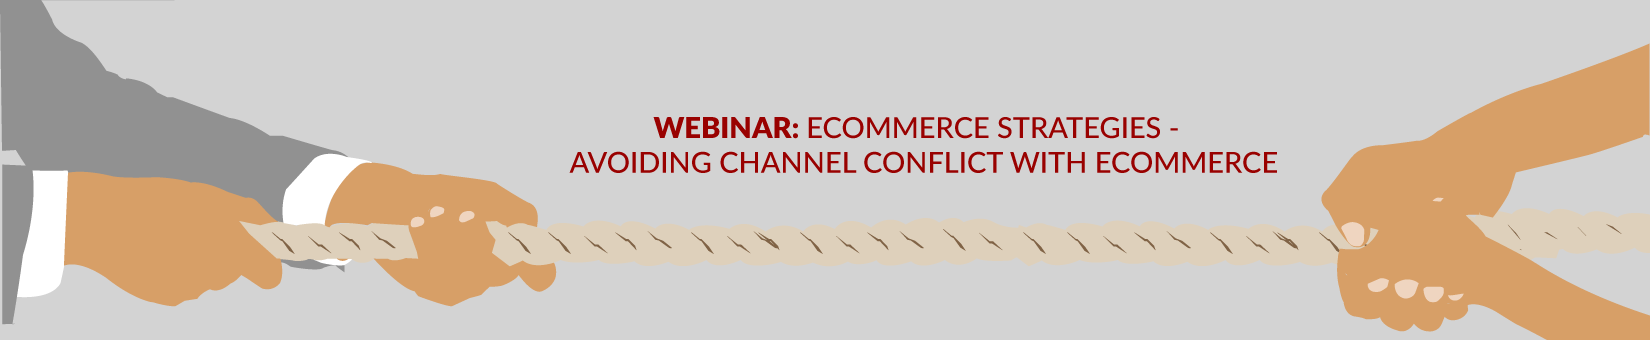 Webinar: Avoiding Channel Conflict With Ecommerce